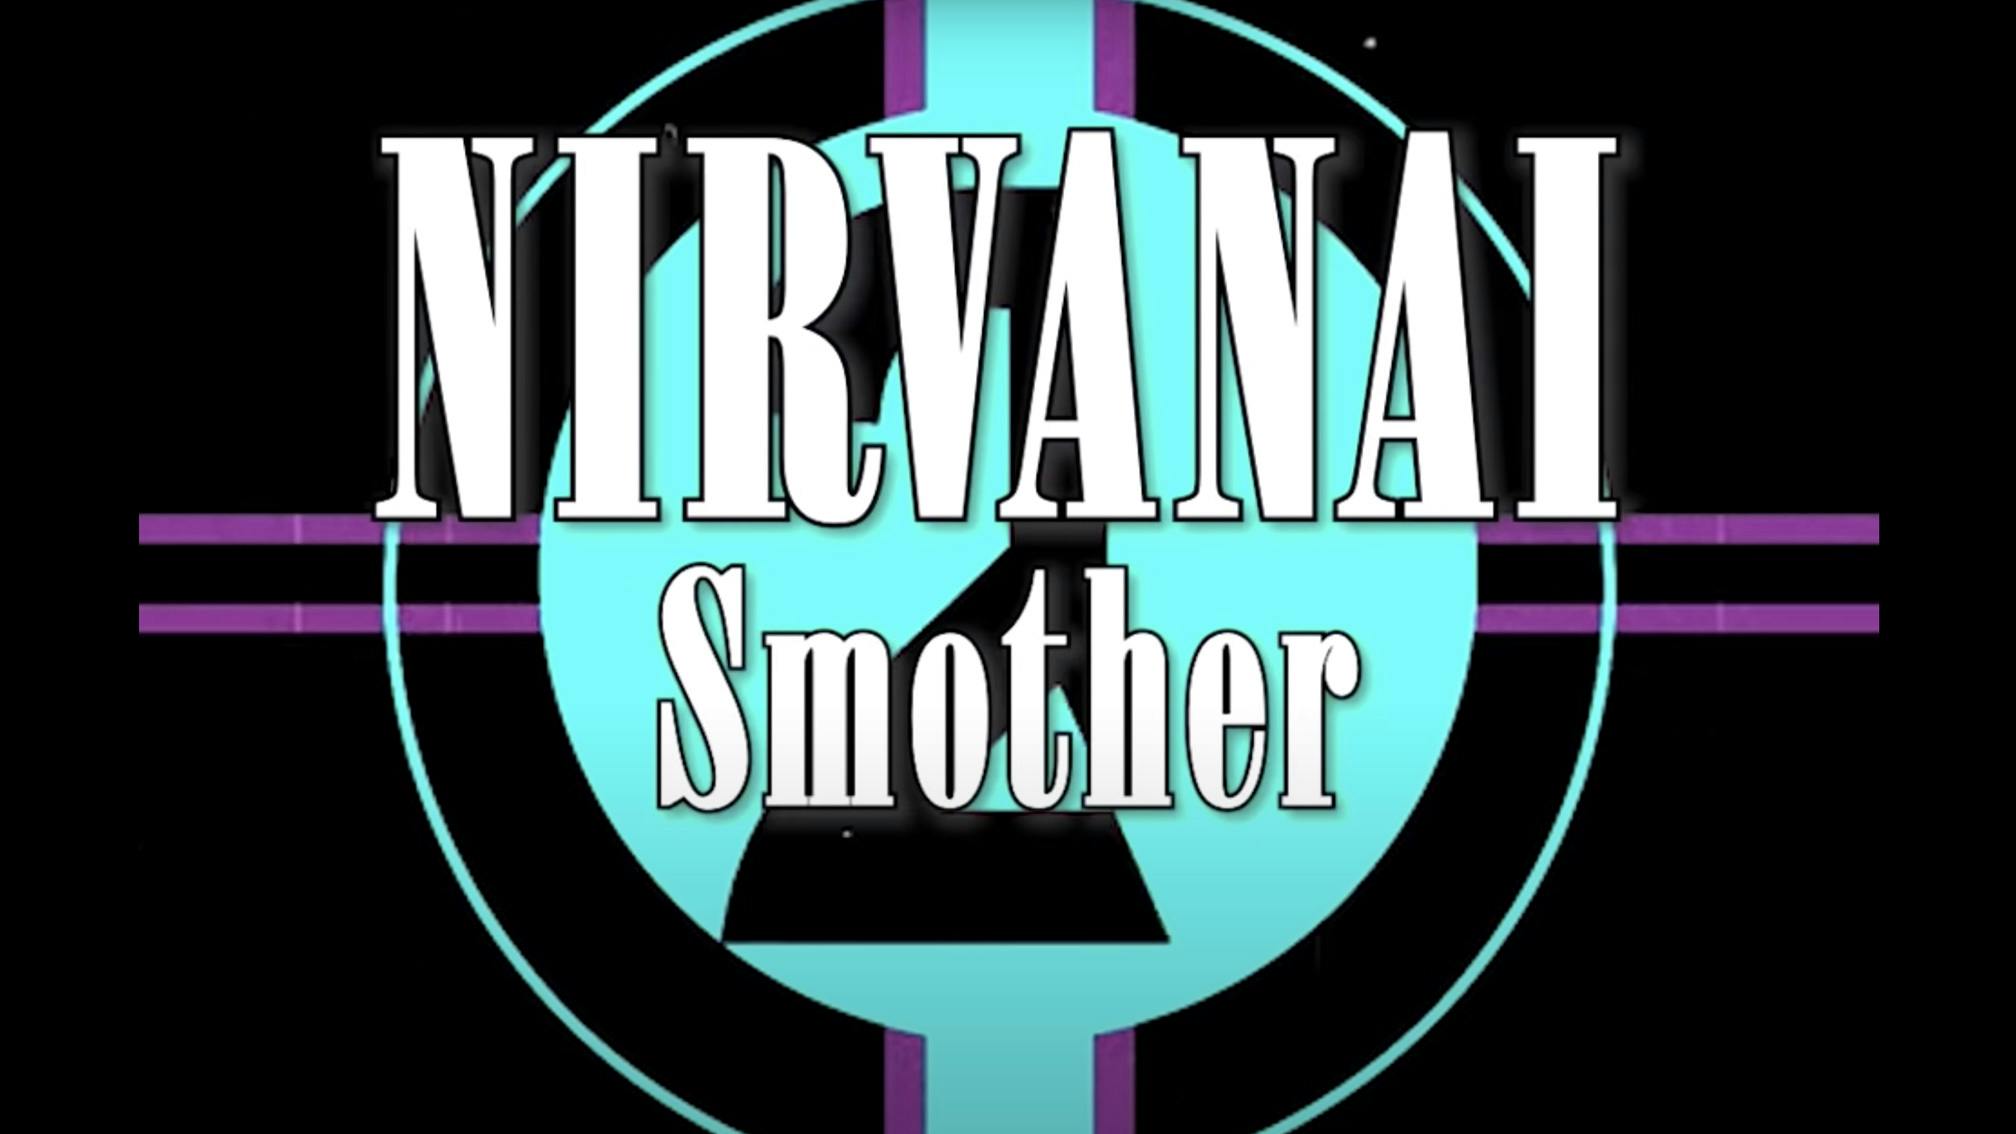 This YouTuber Used Artificial Intelligence To Make A Fake Nirvana Song, Smother